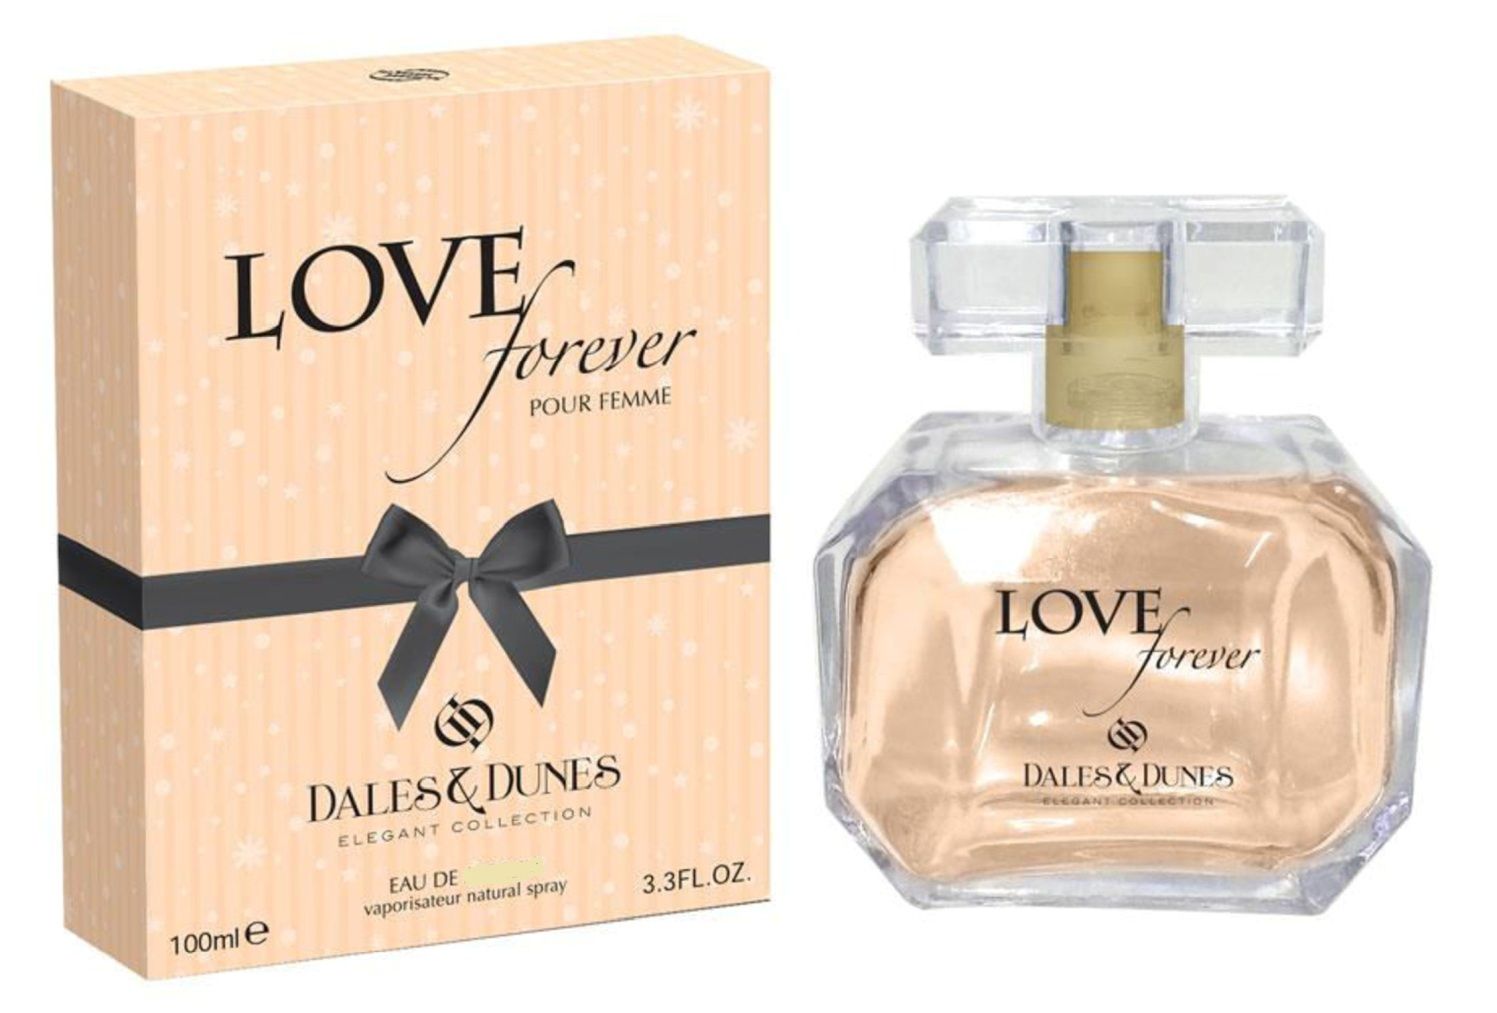 perfume love is forever